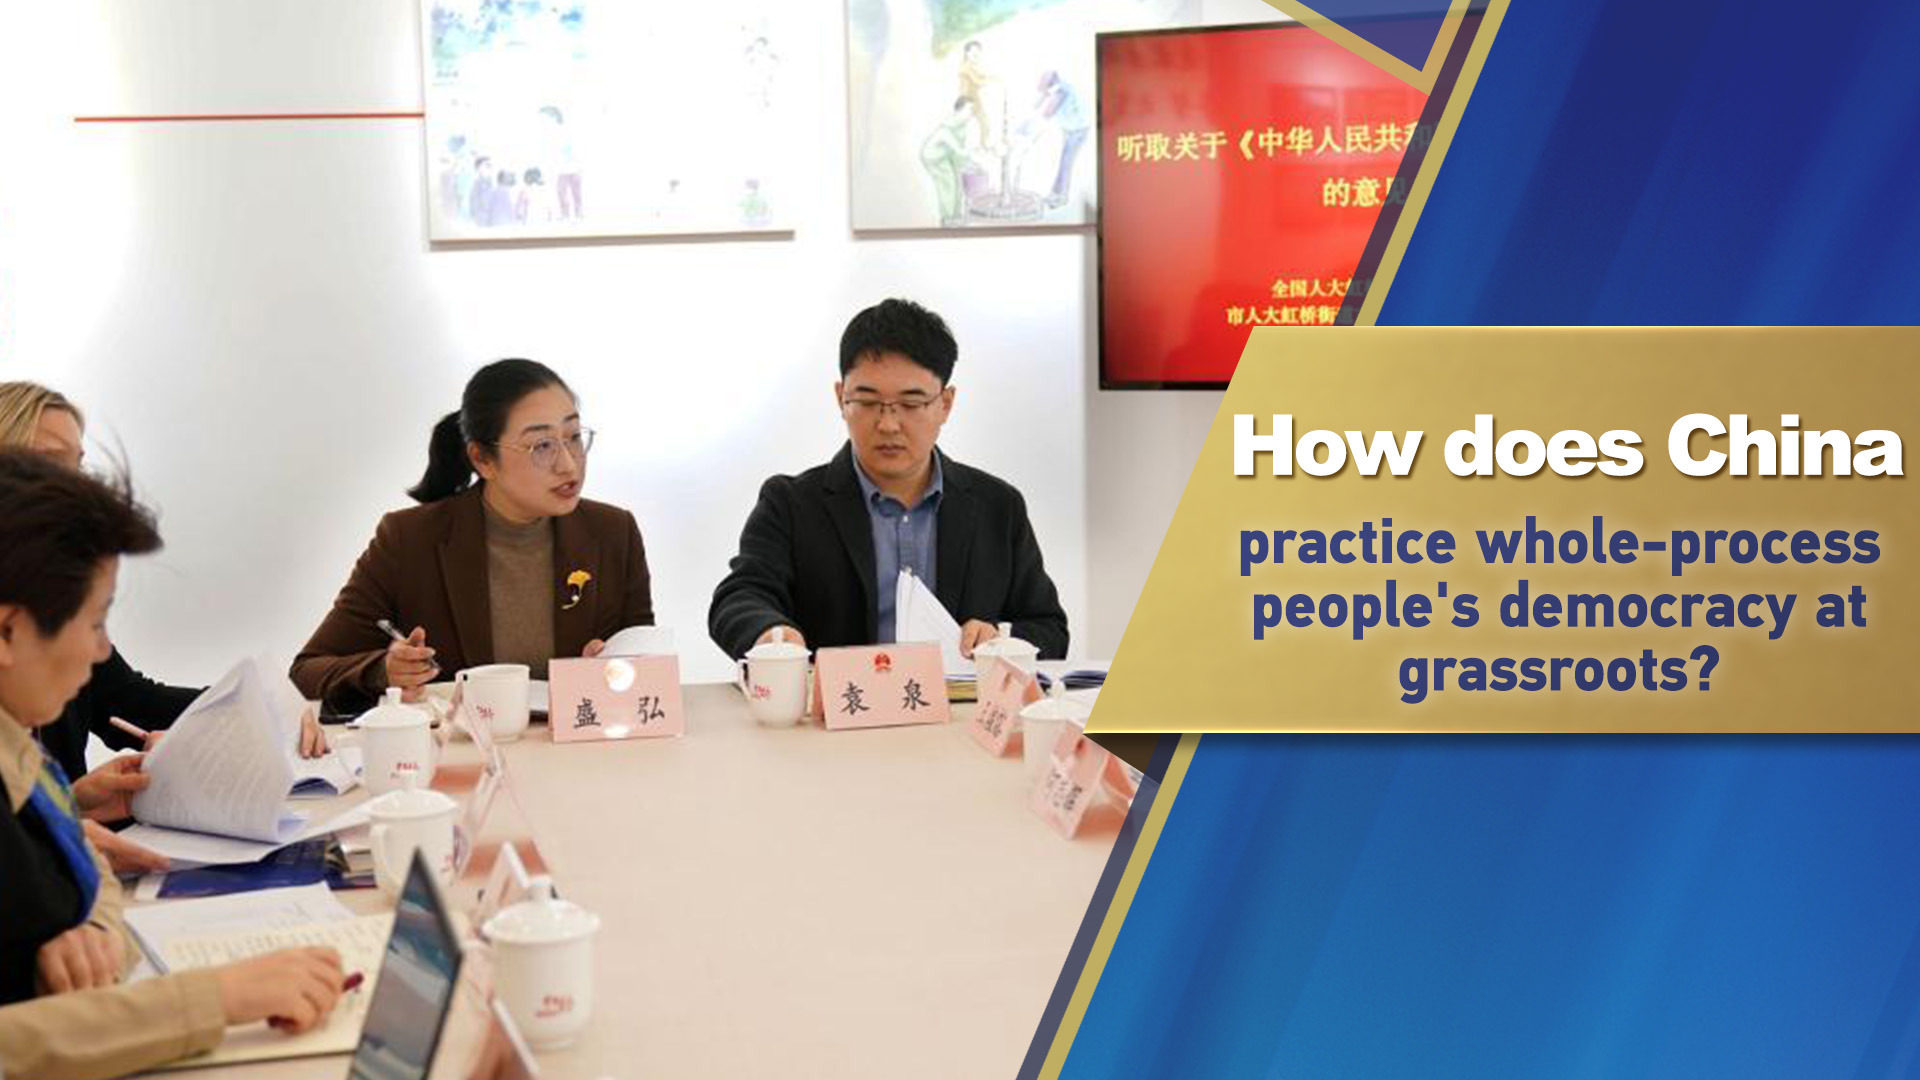 How does China practice whole-process people's democracy